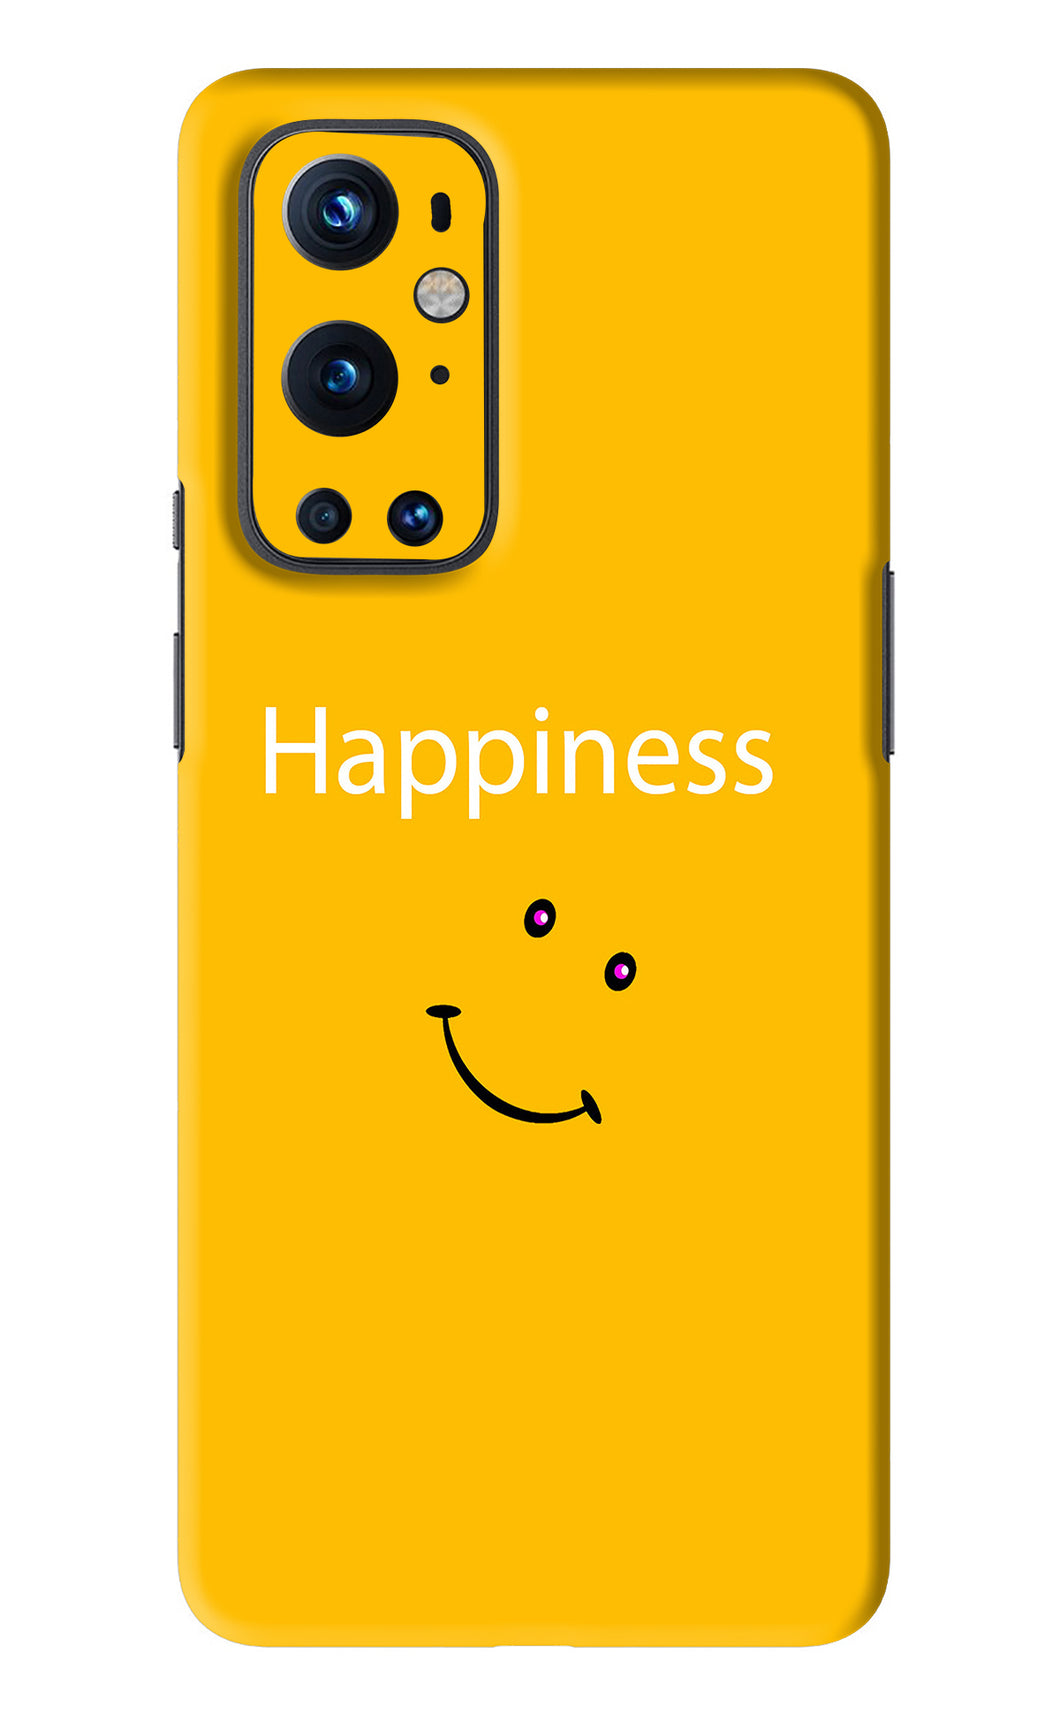 Happiness With Smiley OnePlus 9 Pro Back Skin Wrap